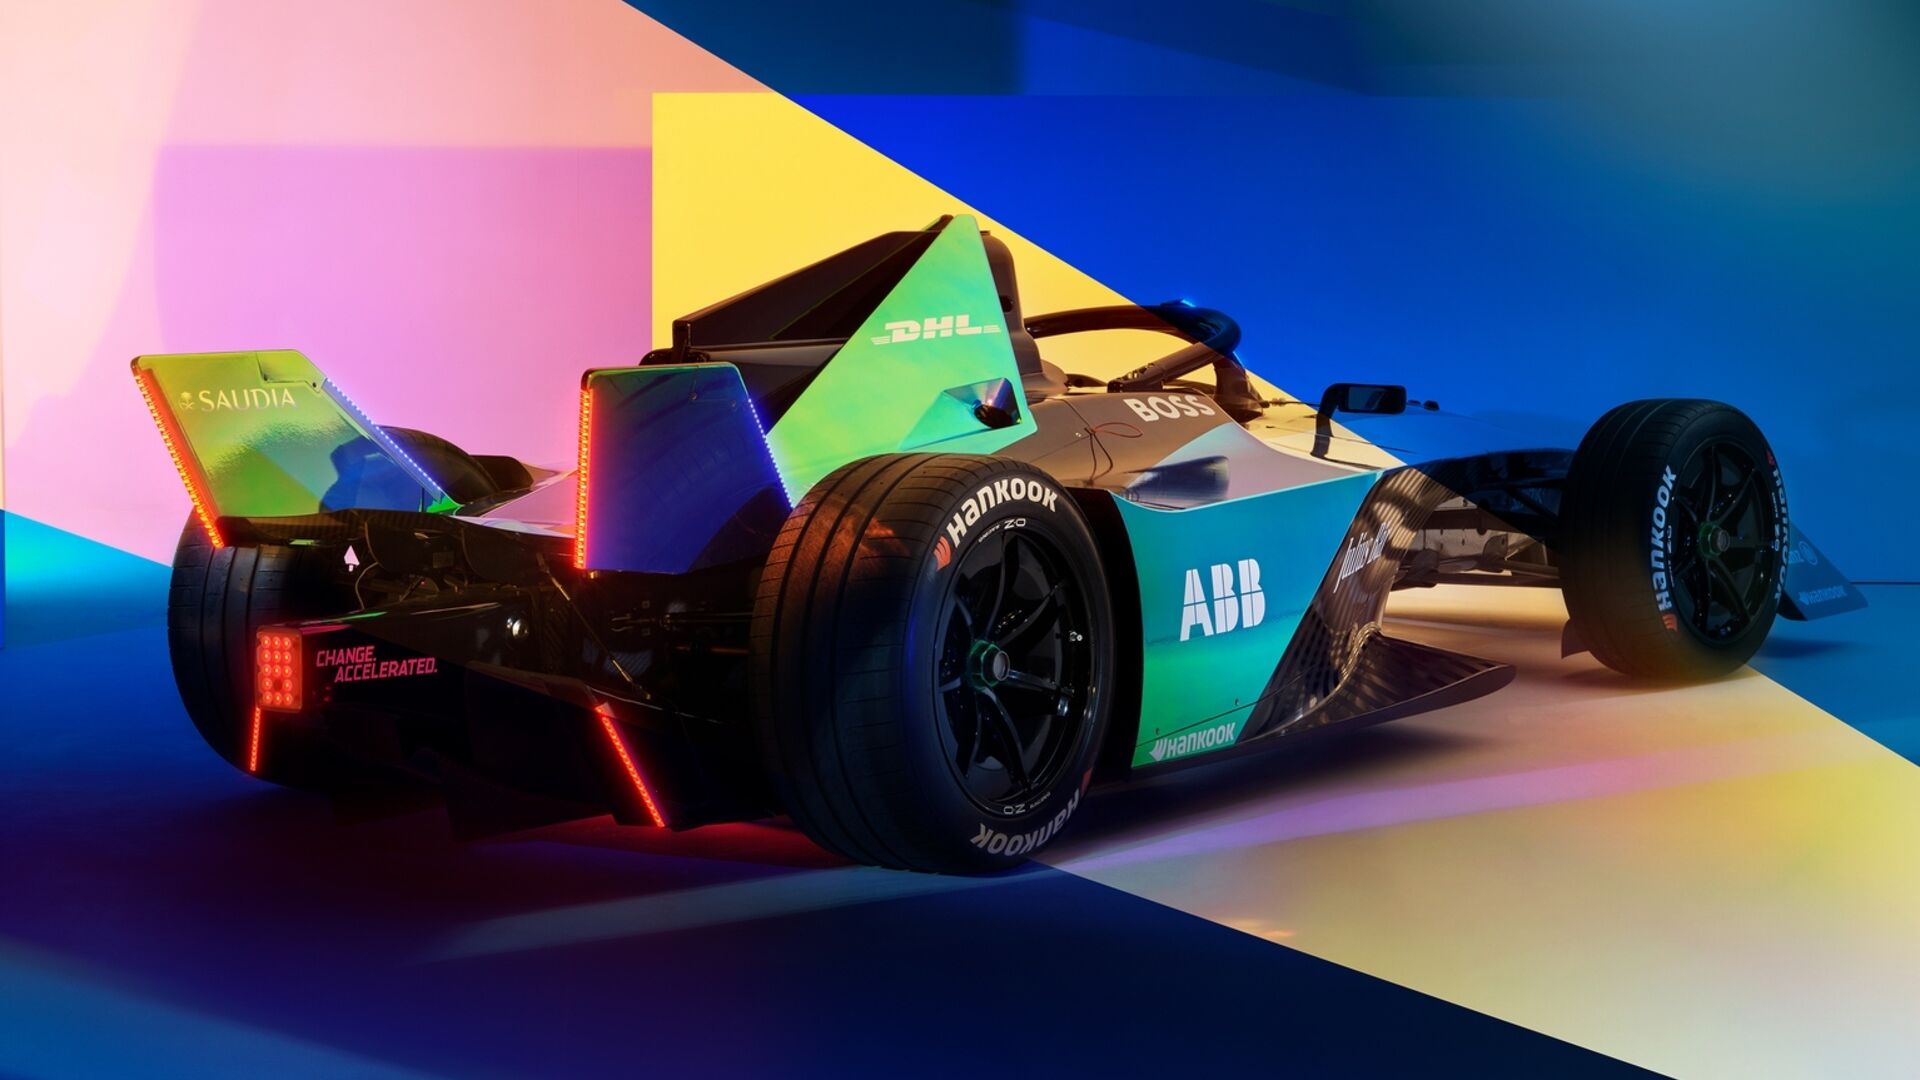 Gen3: Formula E's Gen3 single-seater has around 95 per cent energy efficiency from an electric motor, delivering up to 350 kiloWatts of power (470 horsepower), compared to 40 per cent "thermal"